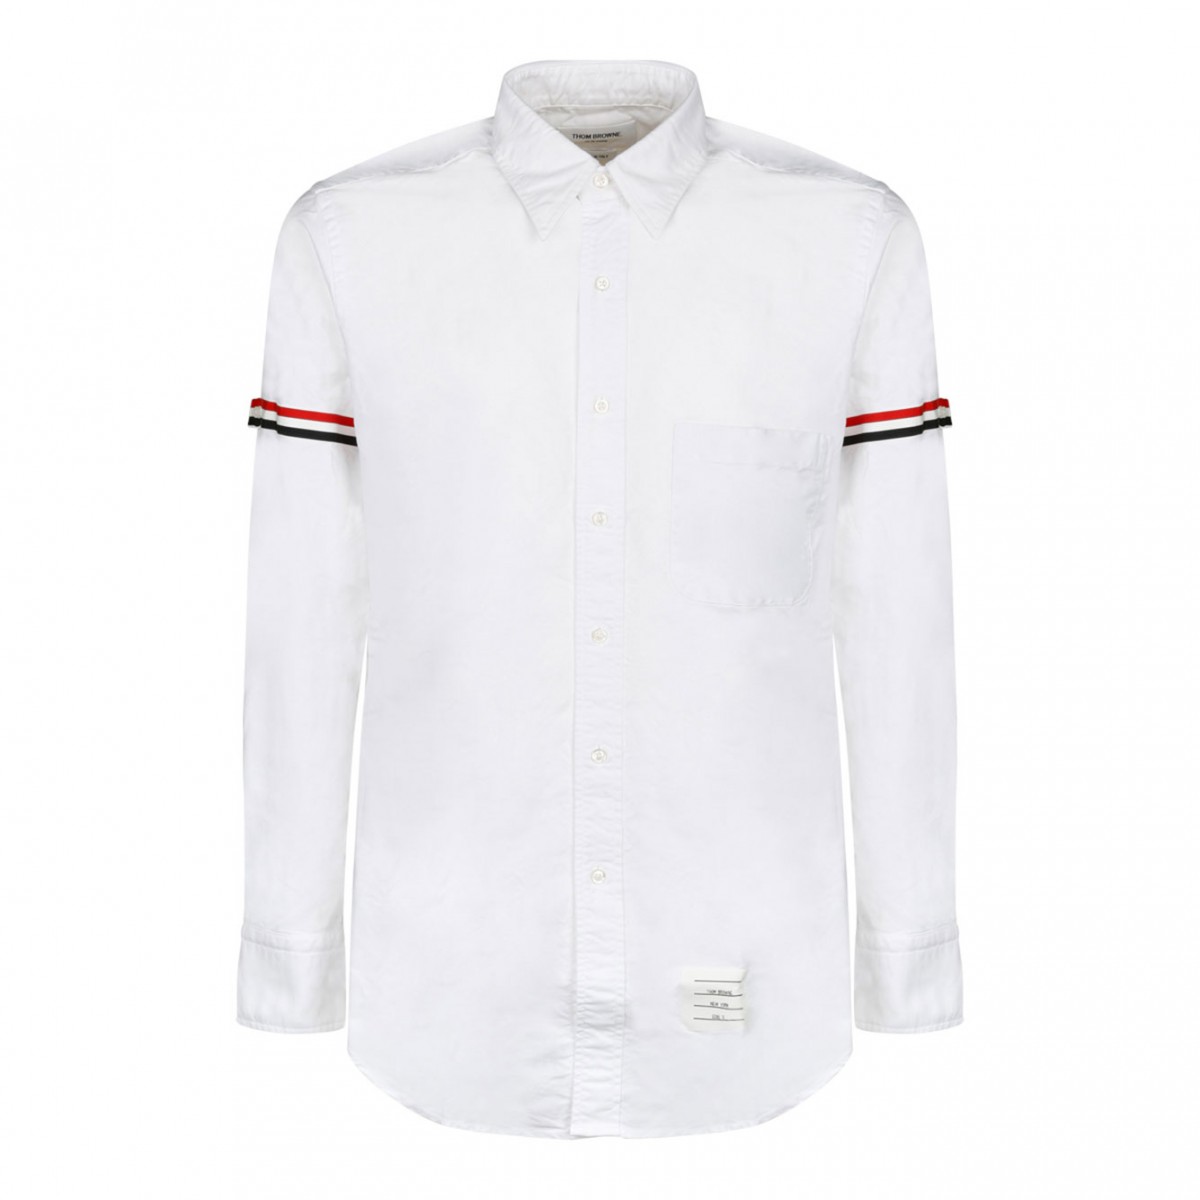 White Oxford Classic Armbands Shirt